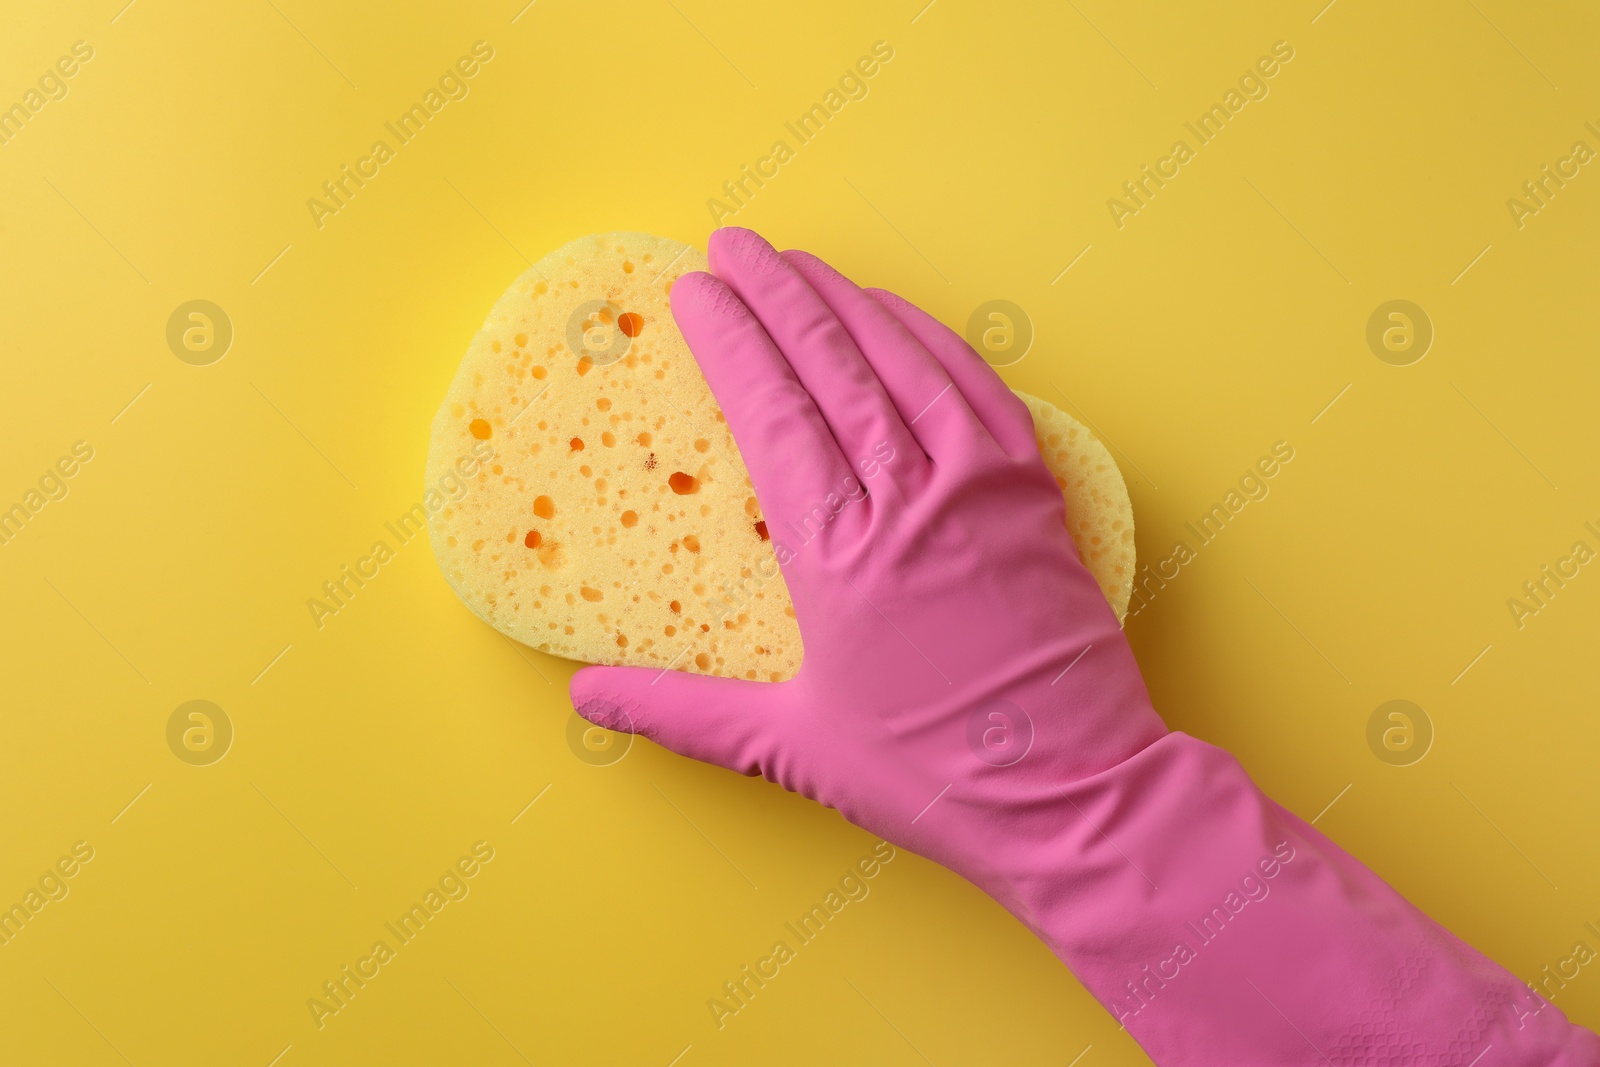 Photo of Cleaner in rubber glove holding new sponge on yellow background, top view